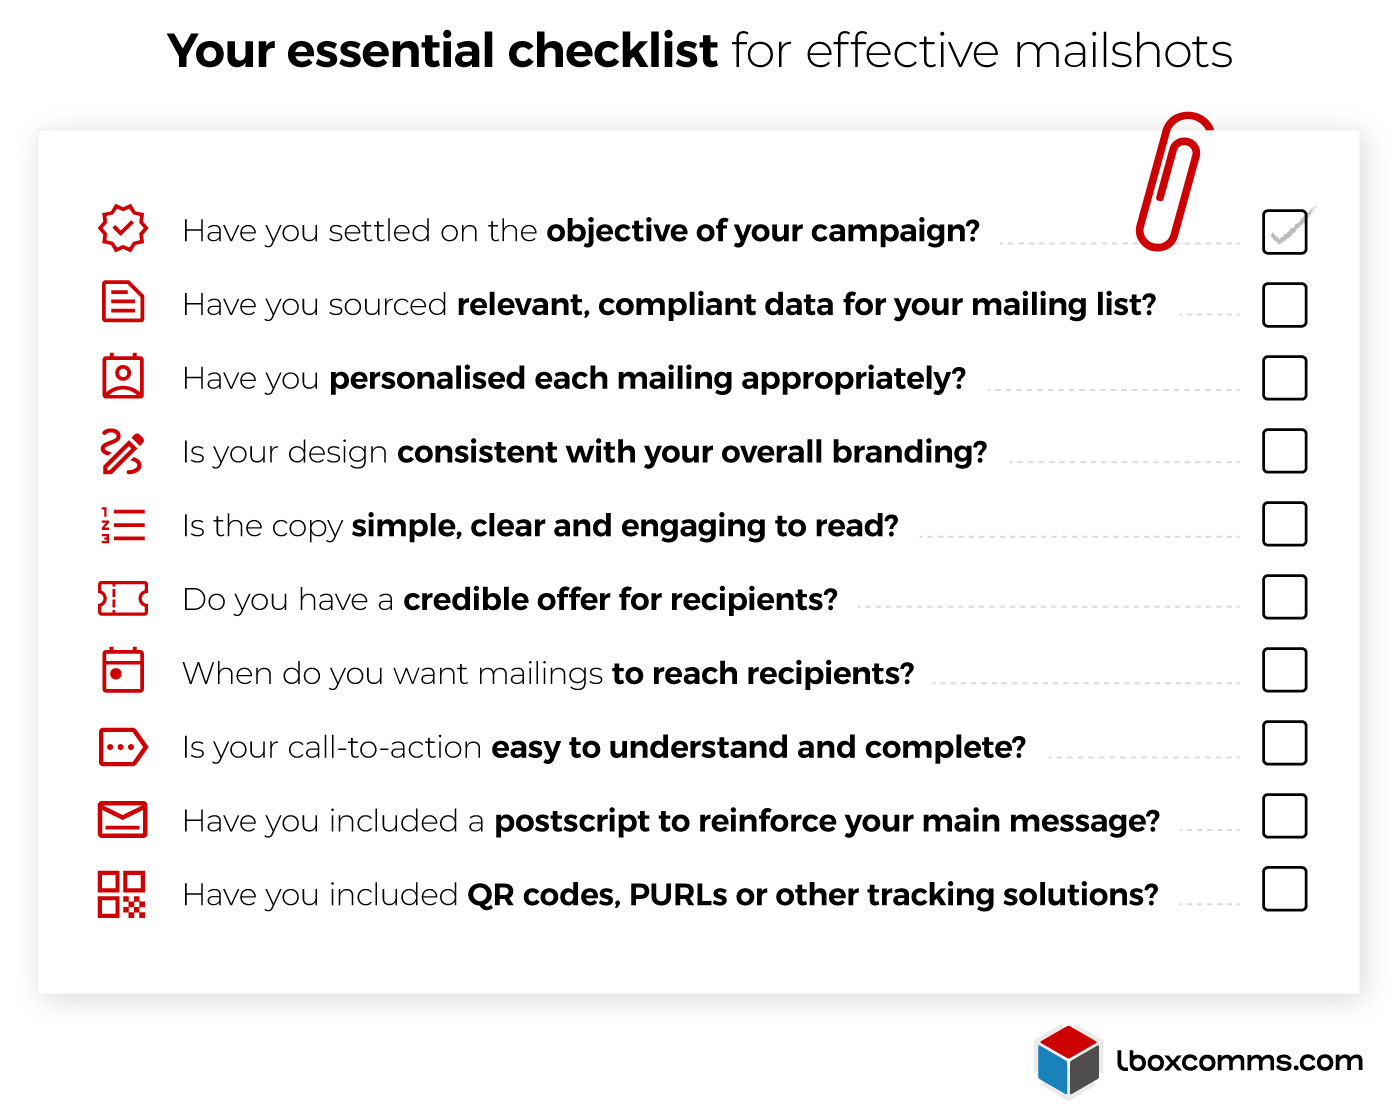 Essential checklist for effective mailshot campaigns - Infographic by Lbox Communications